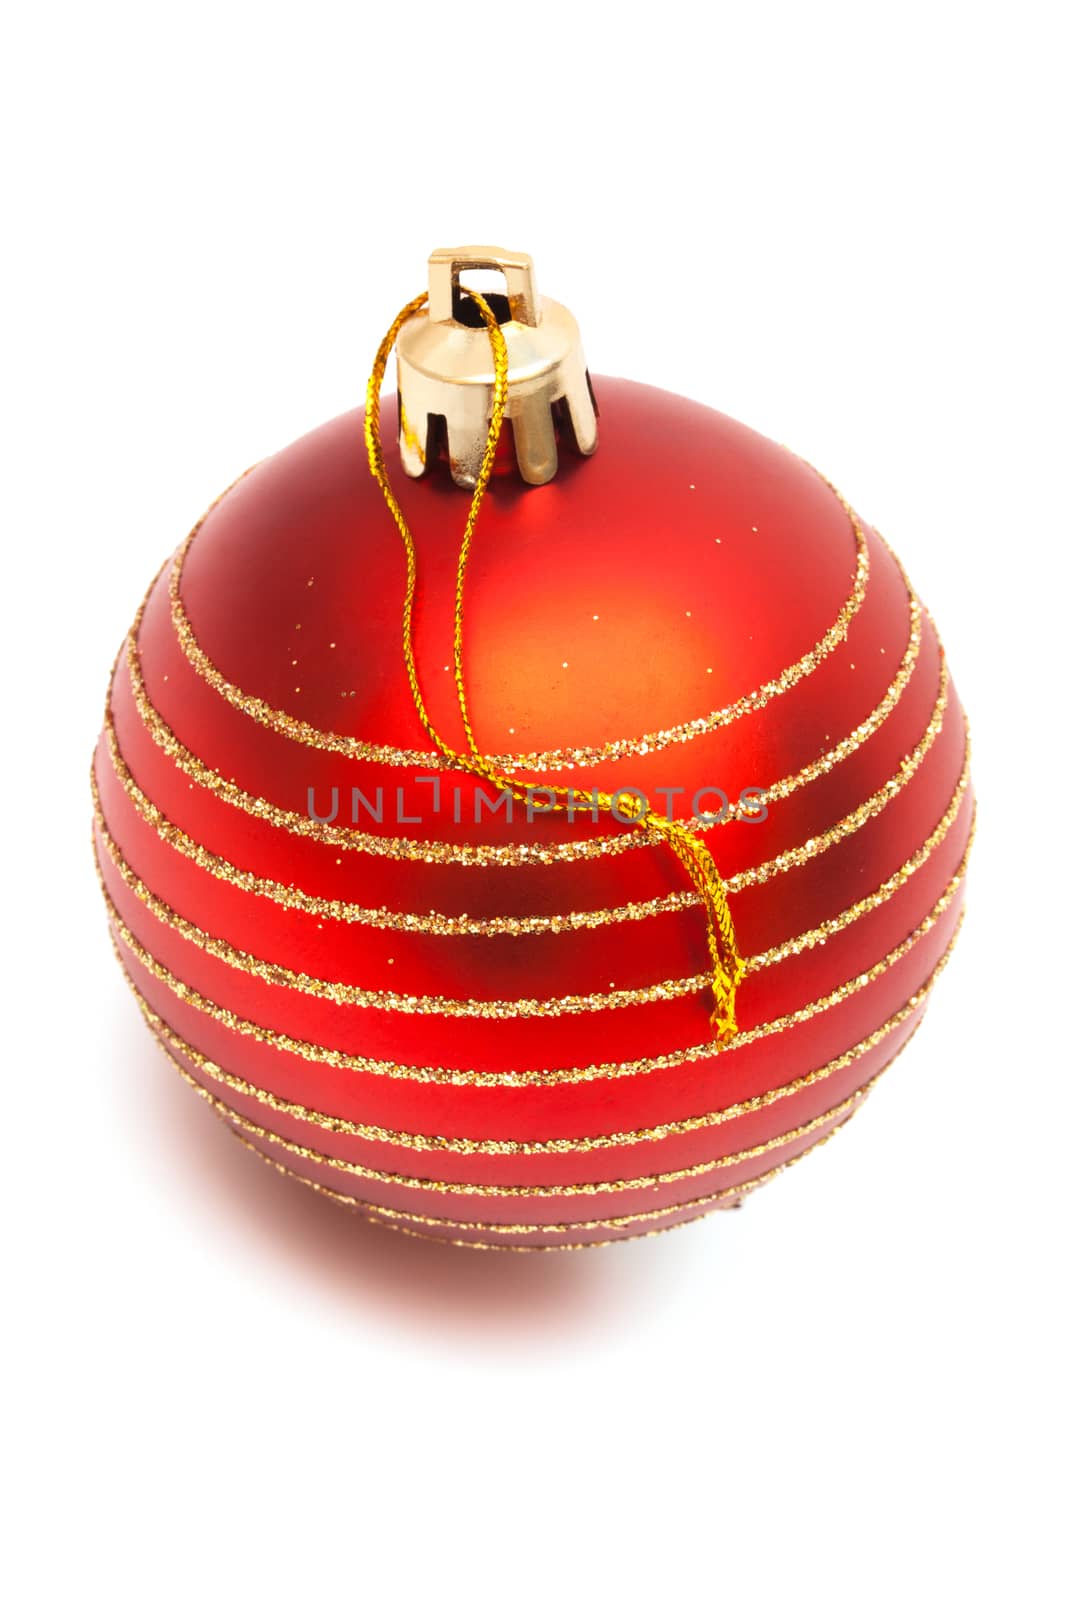 Christmas red ball on white background